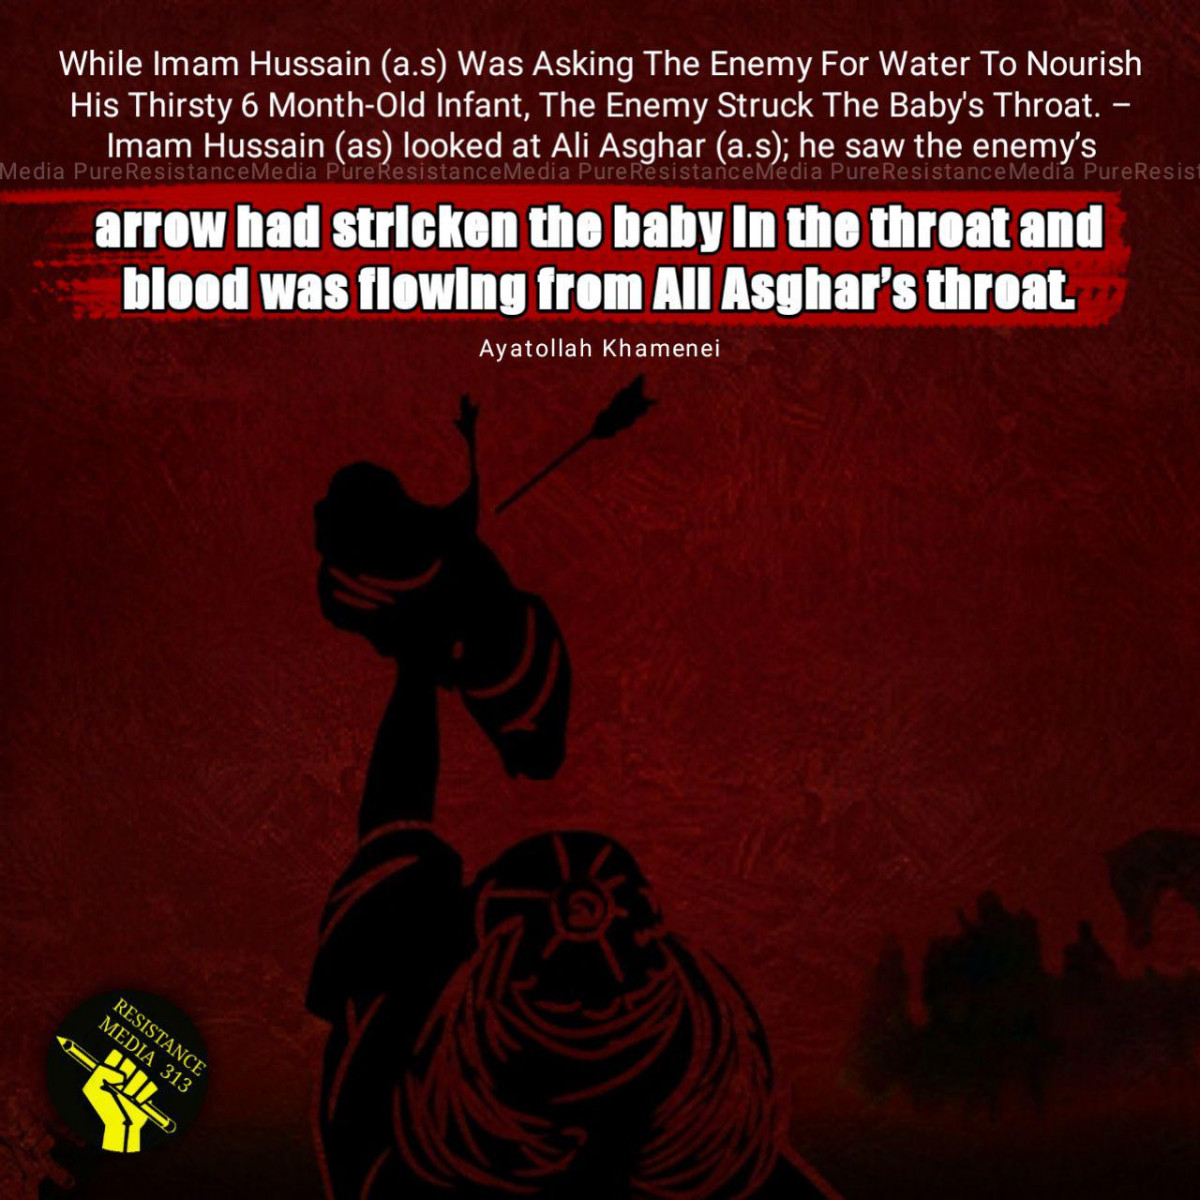 While Imam Hussain (a.s) Was Asking The Enemy For Water To Nourish His Thirsty 6 Month-Old Infant